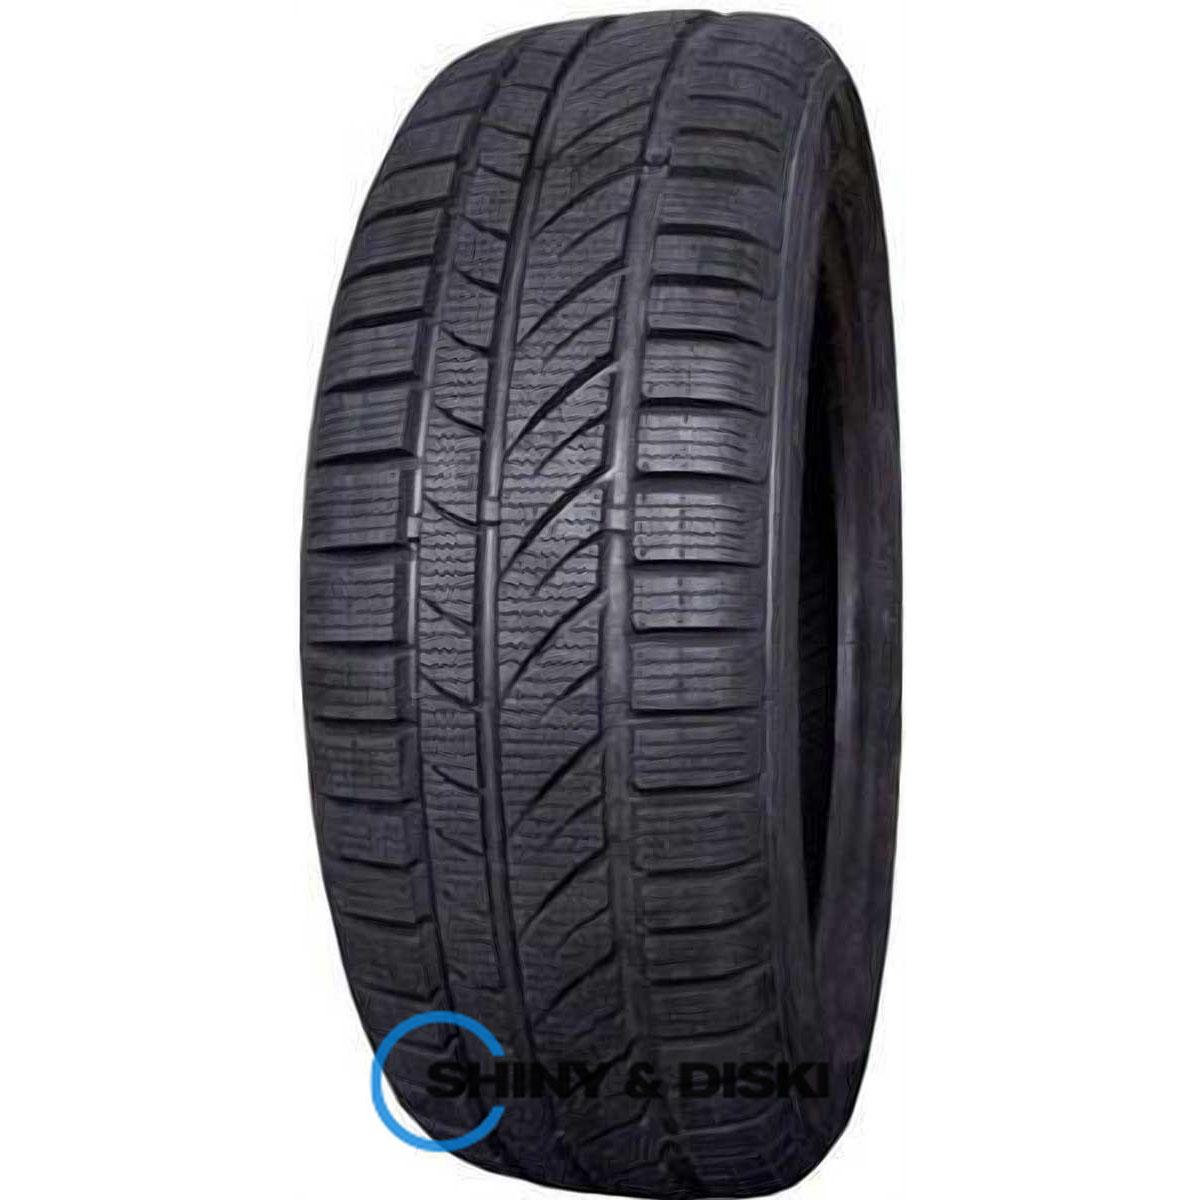 infinity inf-049 155/80 r13 79t